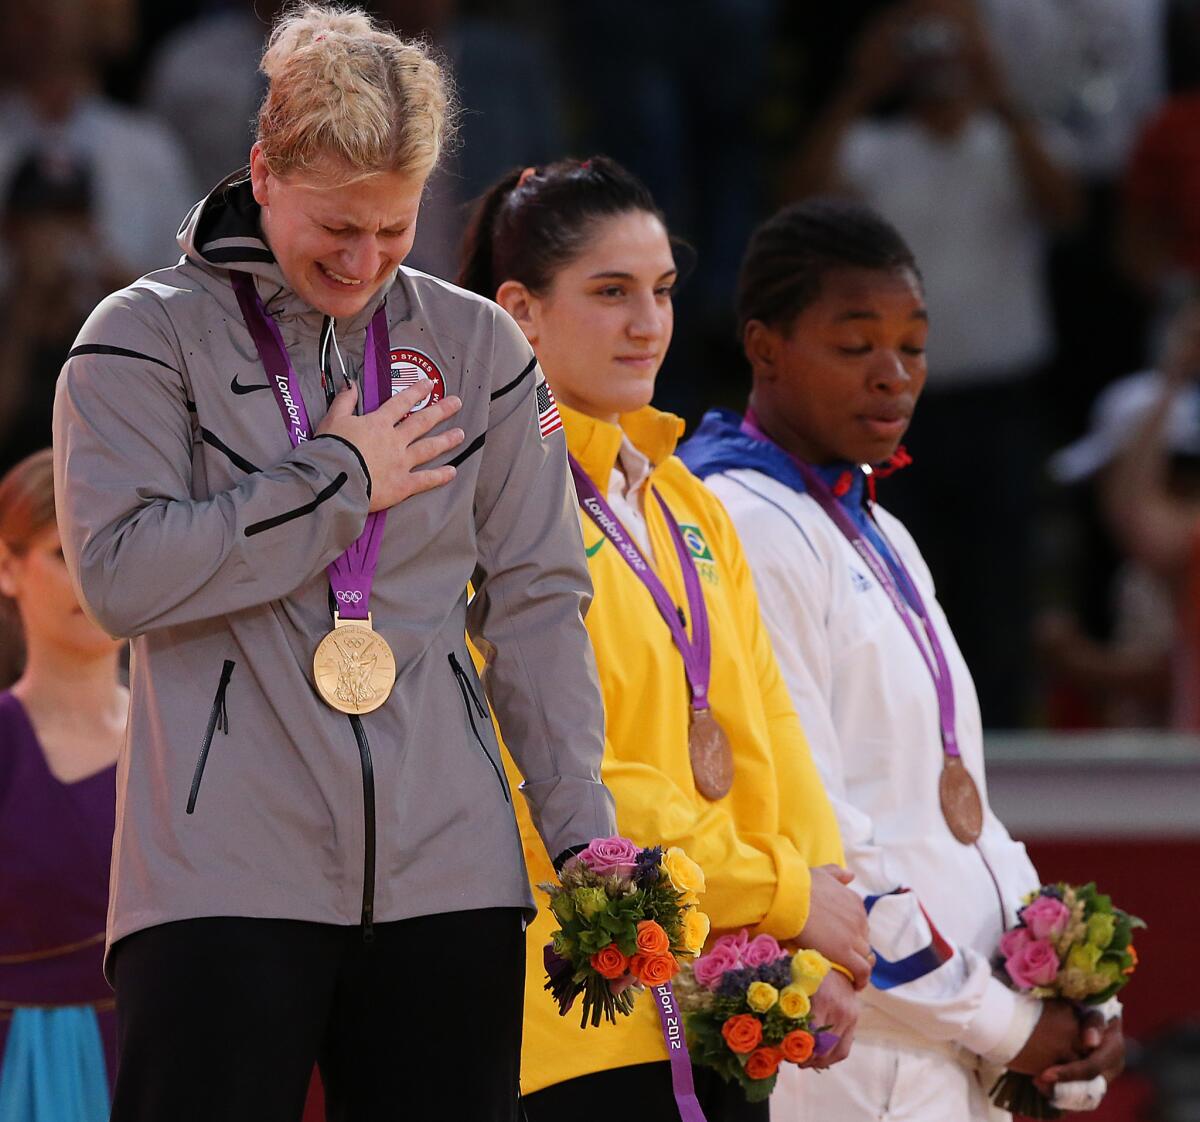 United States judo wrestler Kayla Harrison holds back tears as the national anthem plays during her gold medal ceremony at the London 2012 Olympics.